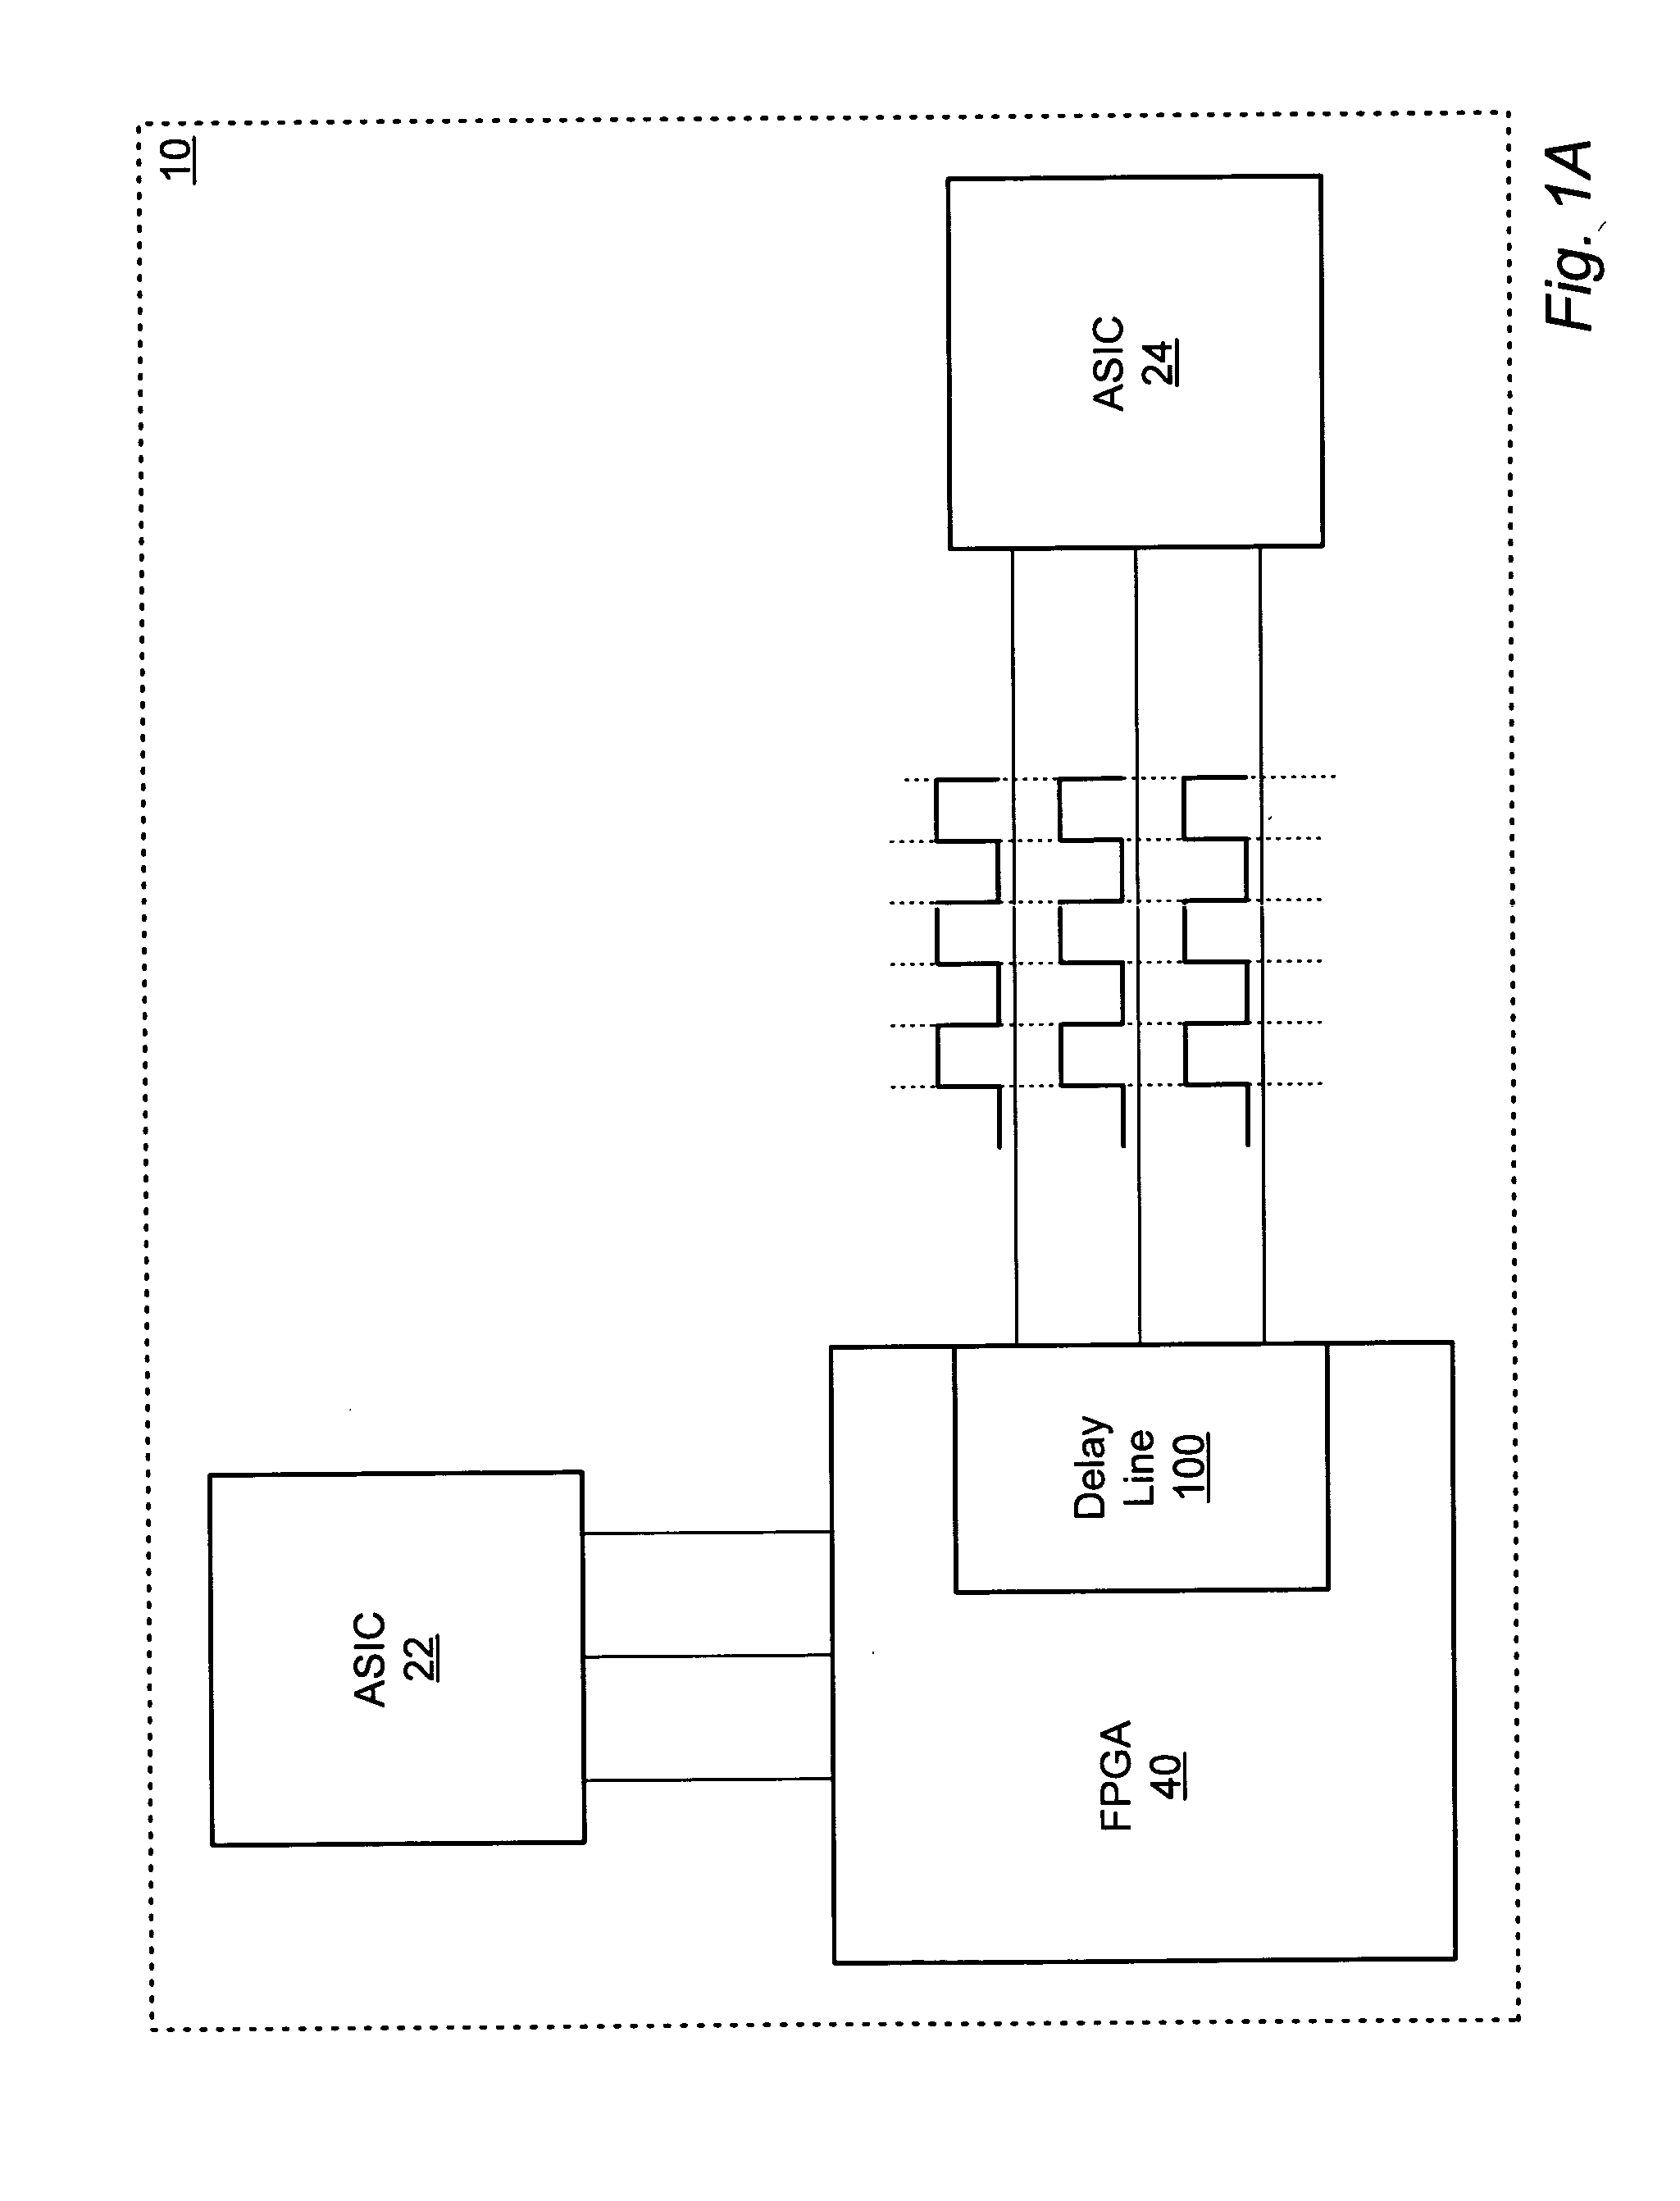 Digital delay elements constructed in a programmable logic device